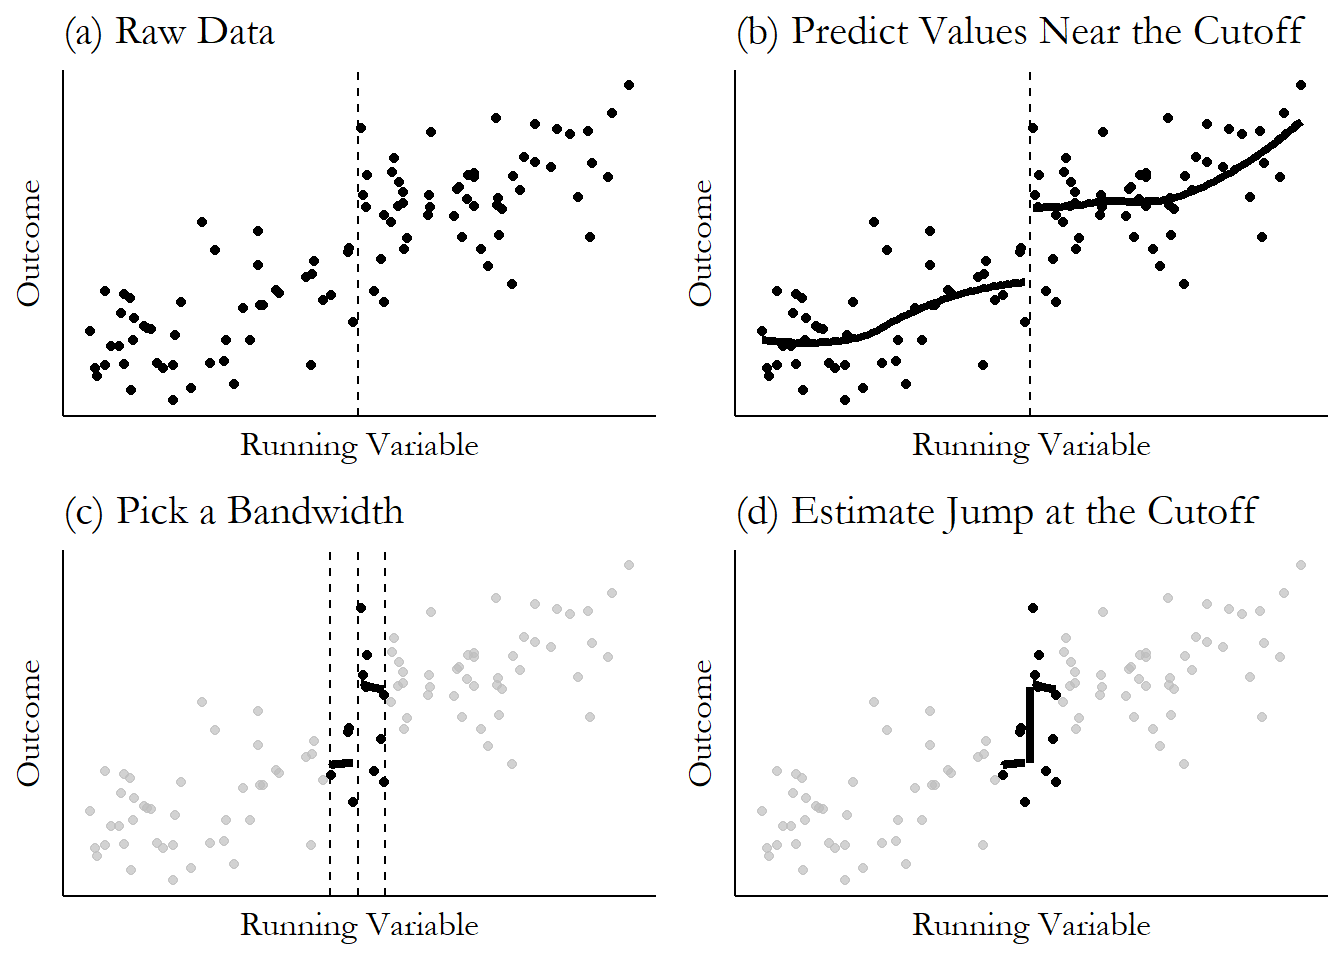 Four graphs. The first shows raw data with a cutoff on the $x$-axis, where the data clearly jumps a bit after that cutoff. The second shows a smooth line fitted to the data, with a separate line to the left and right of the cutoff. The third is the same as the second except that it's limited to just data right around the cutoff. The fourth shows the jump from the line on the left and the line on the right at the point of the cutoff, which is the regression discontinuity estimate.